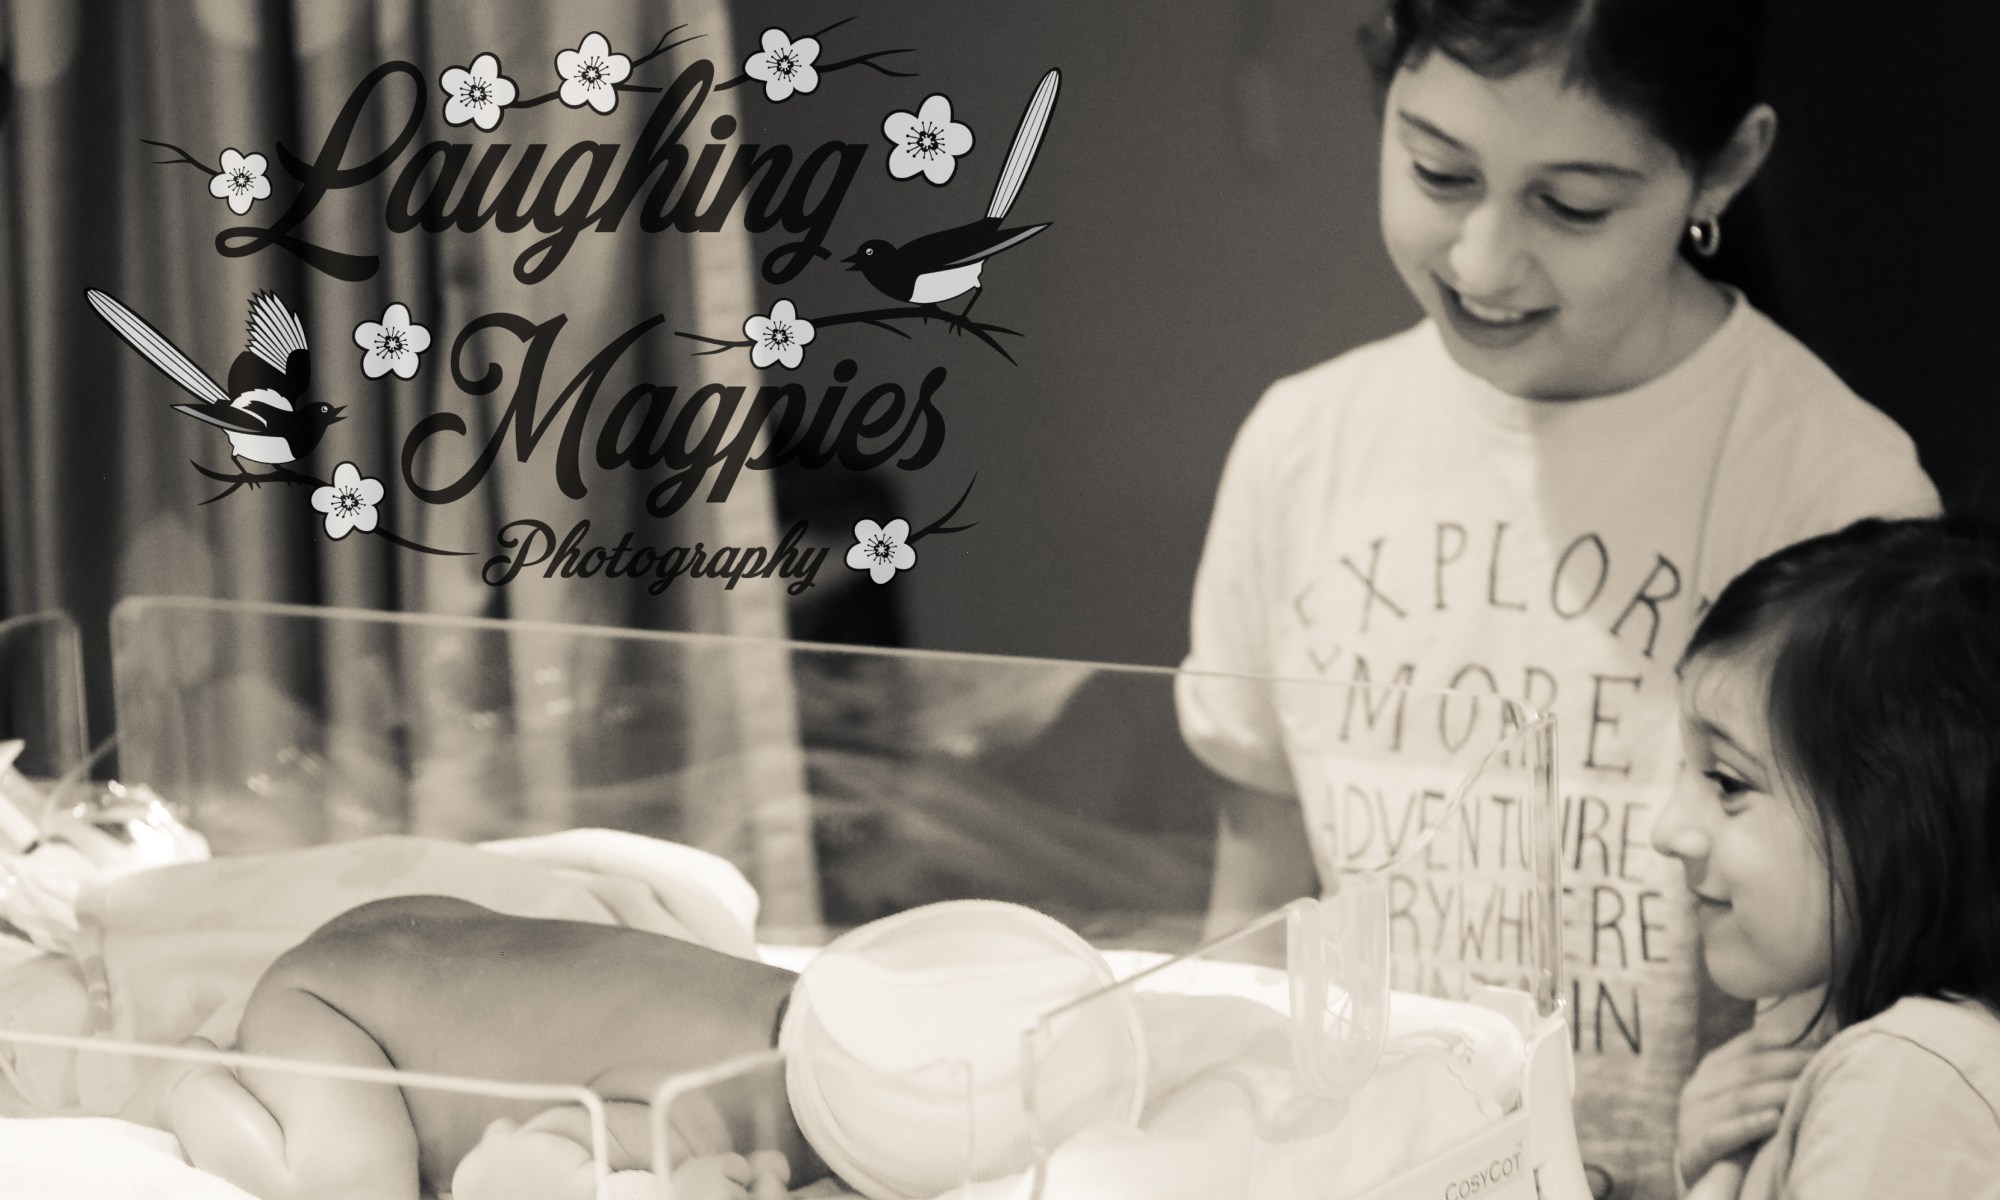 Client Resources – Laughing Magpies Photography